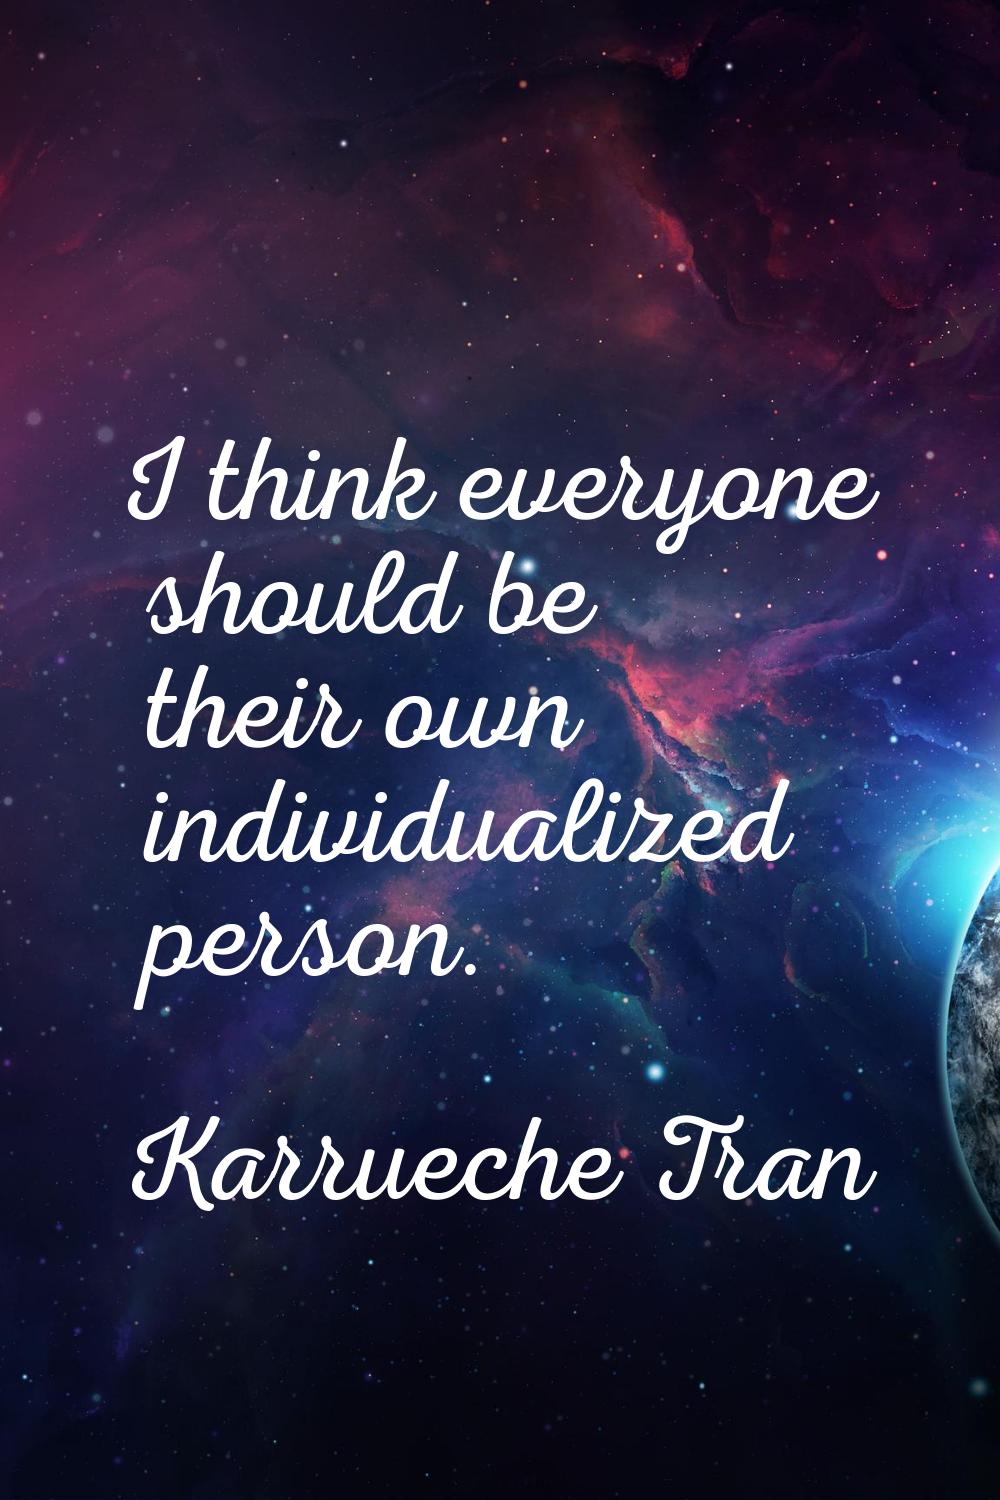 I think everyone should be their own individualized person.